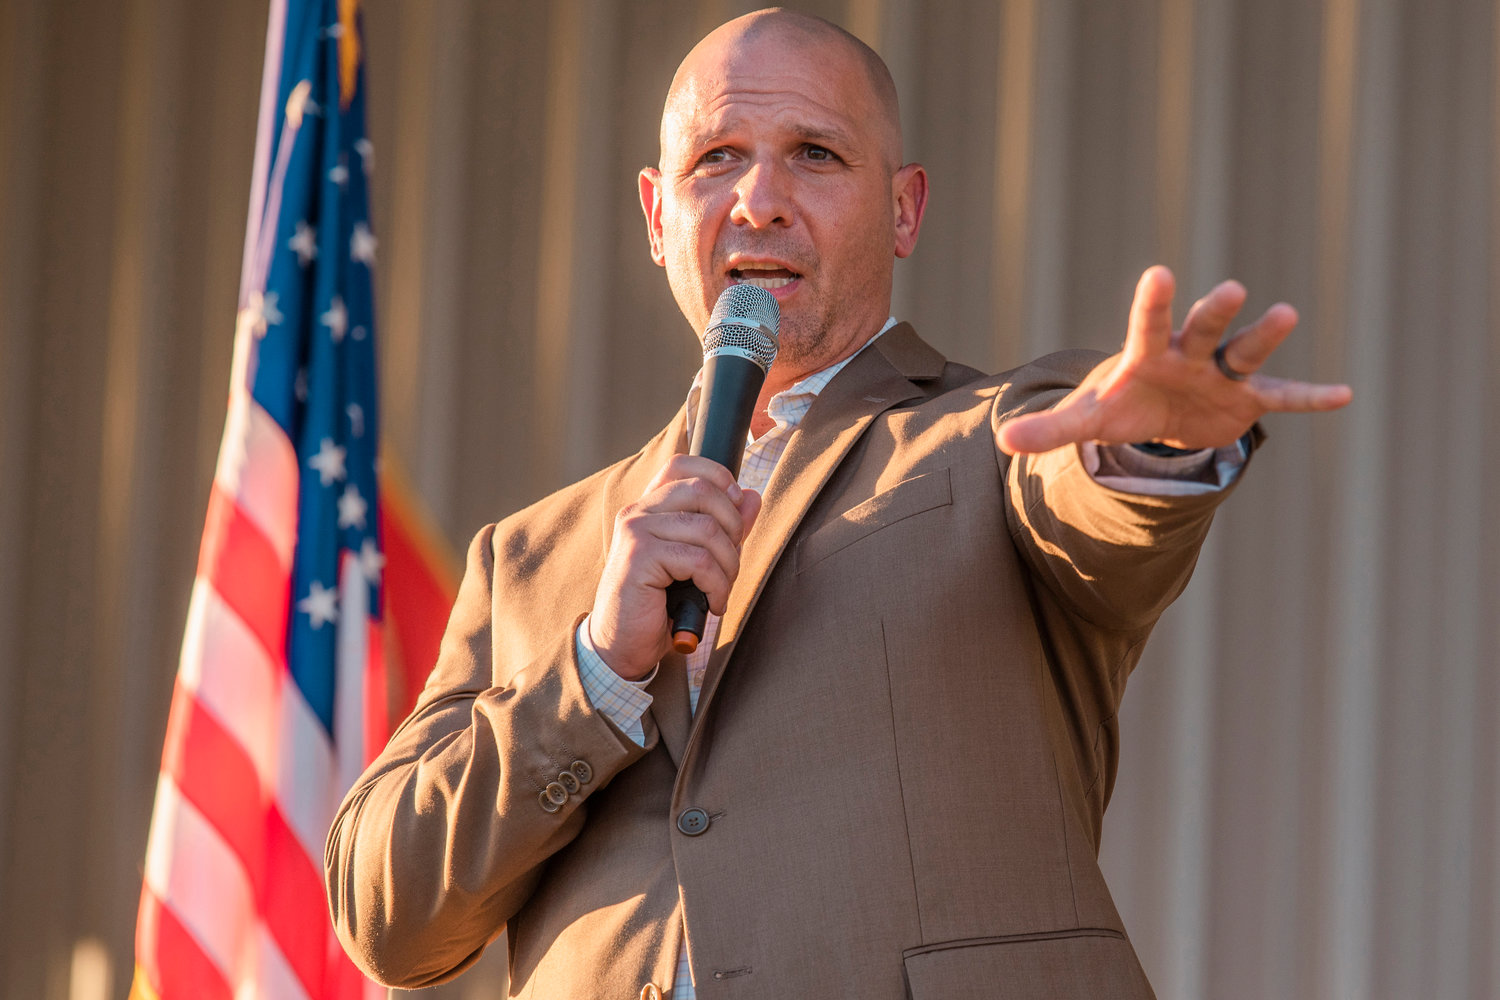 State Rep. Peter Abbarno, R-Centralia, speaks at a town hall in September 2021.